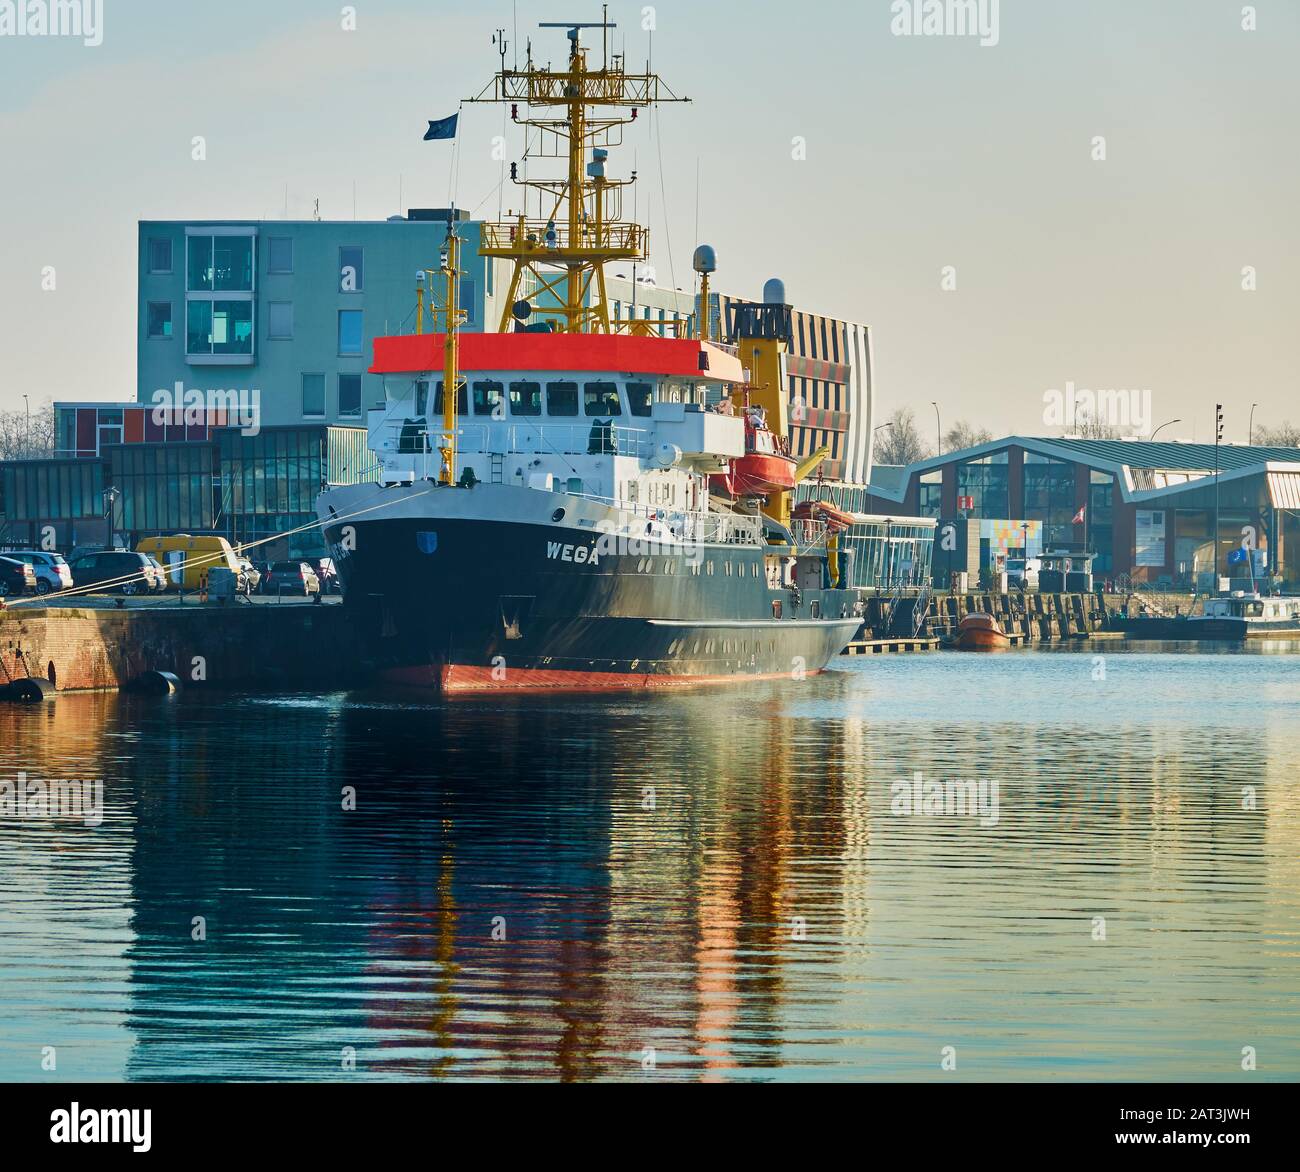 Bremerhaven, Germany, January 16., 2020: The Wega, a research vessel of the German Maritime Authority, for surveying and searching for wrecks in the B Stock Photo